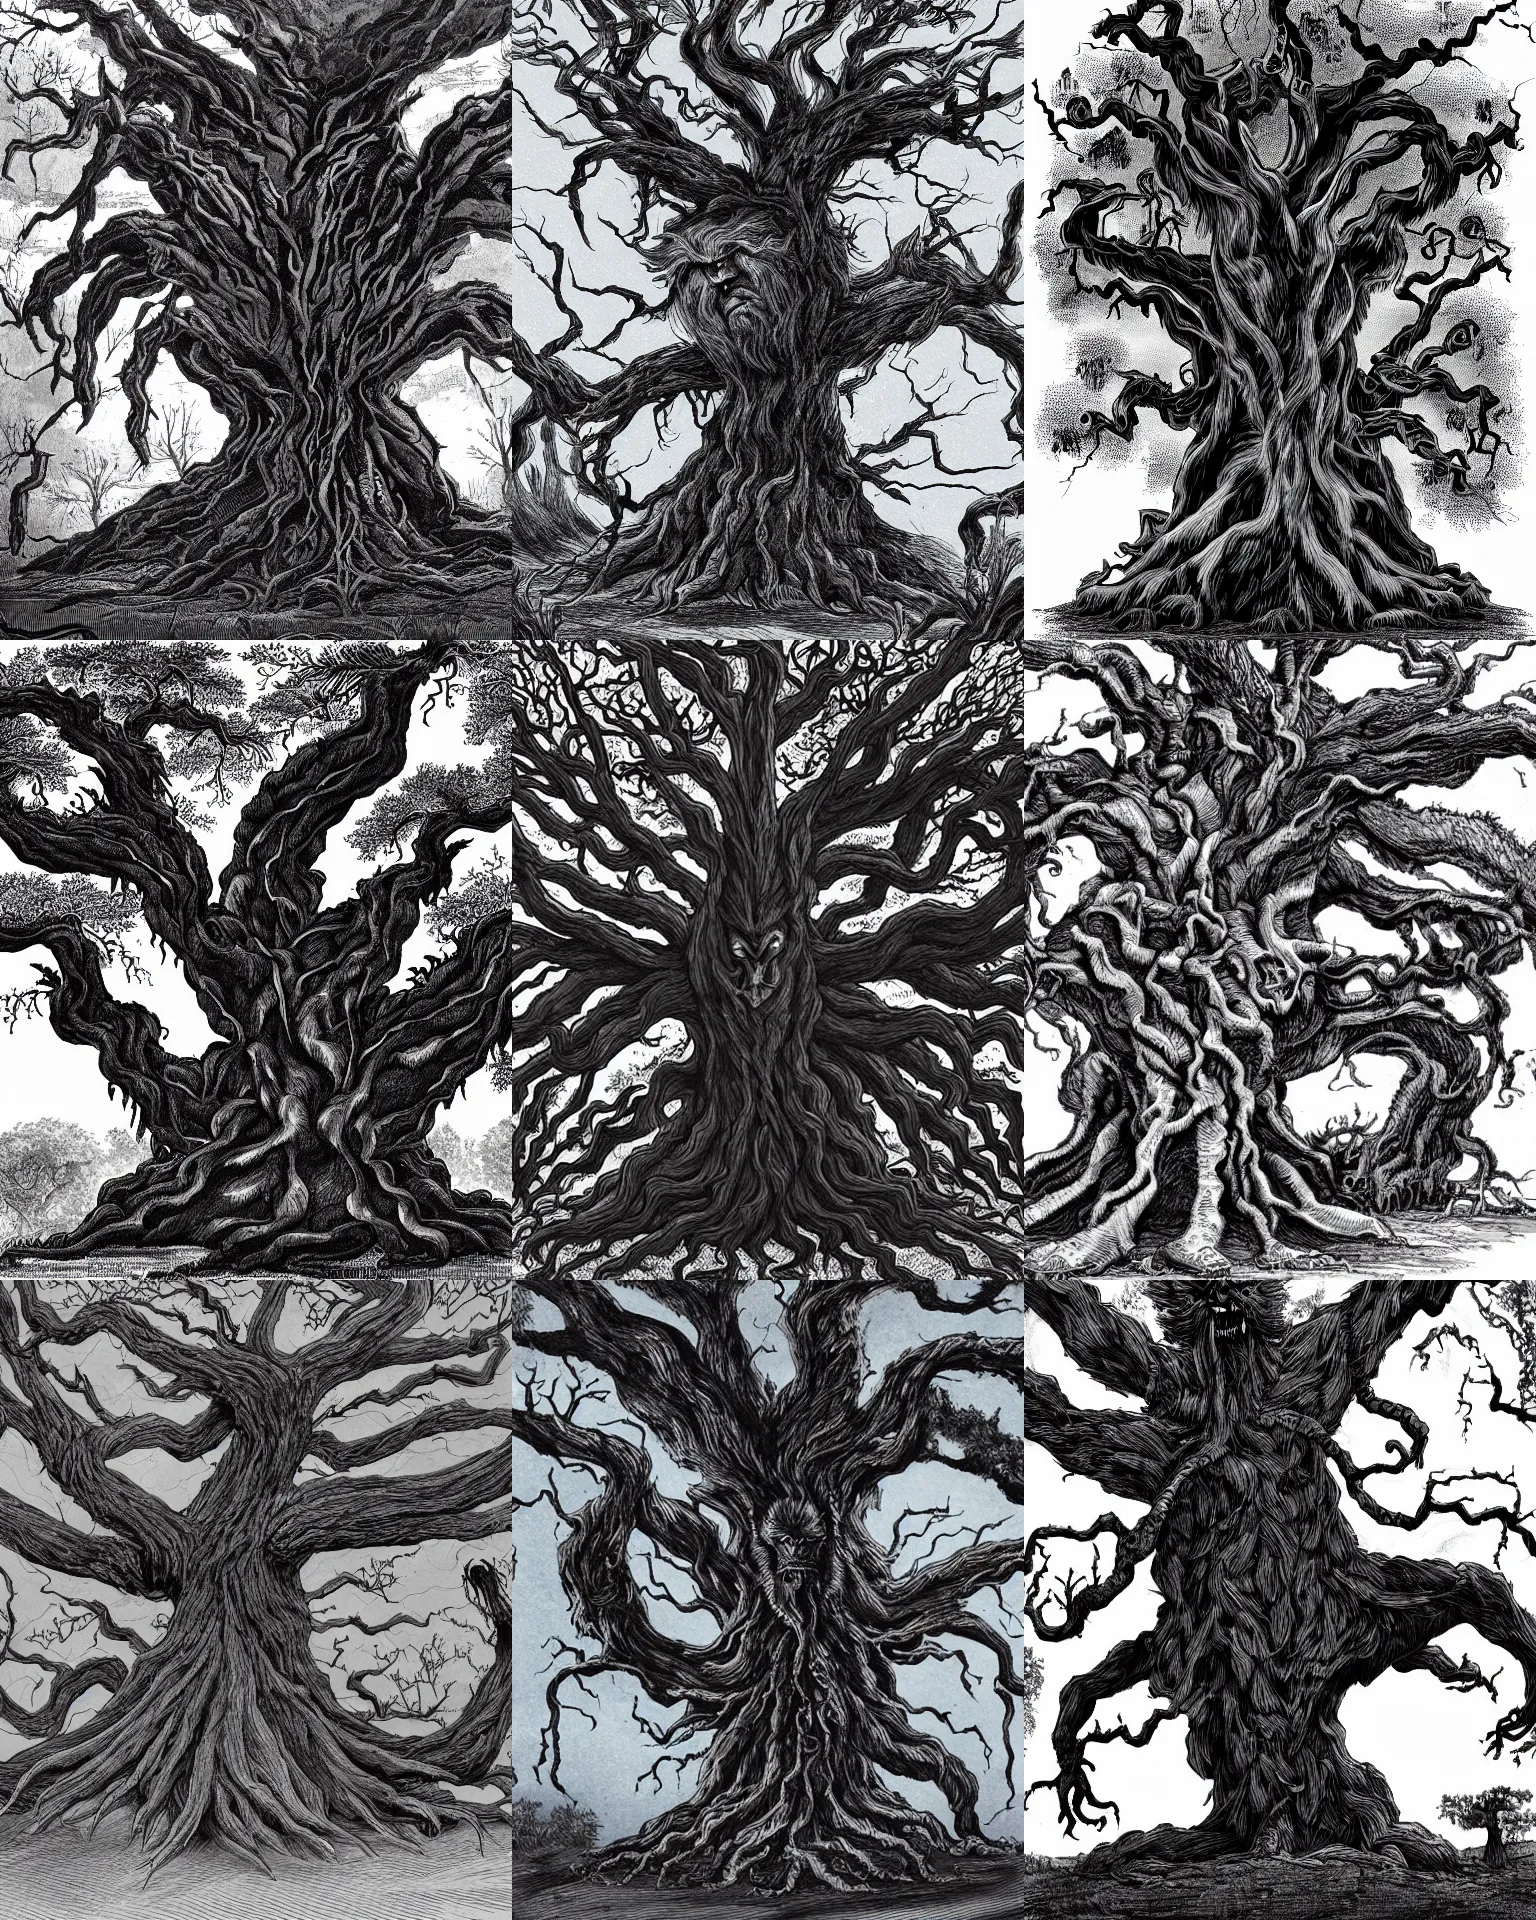 Prompt: an illustration of an ancient oak tree possessed by a dark entity and transformed into a beast